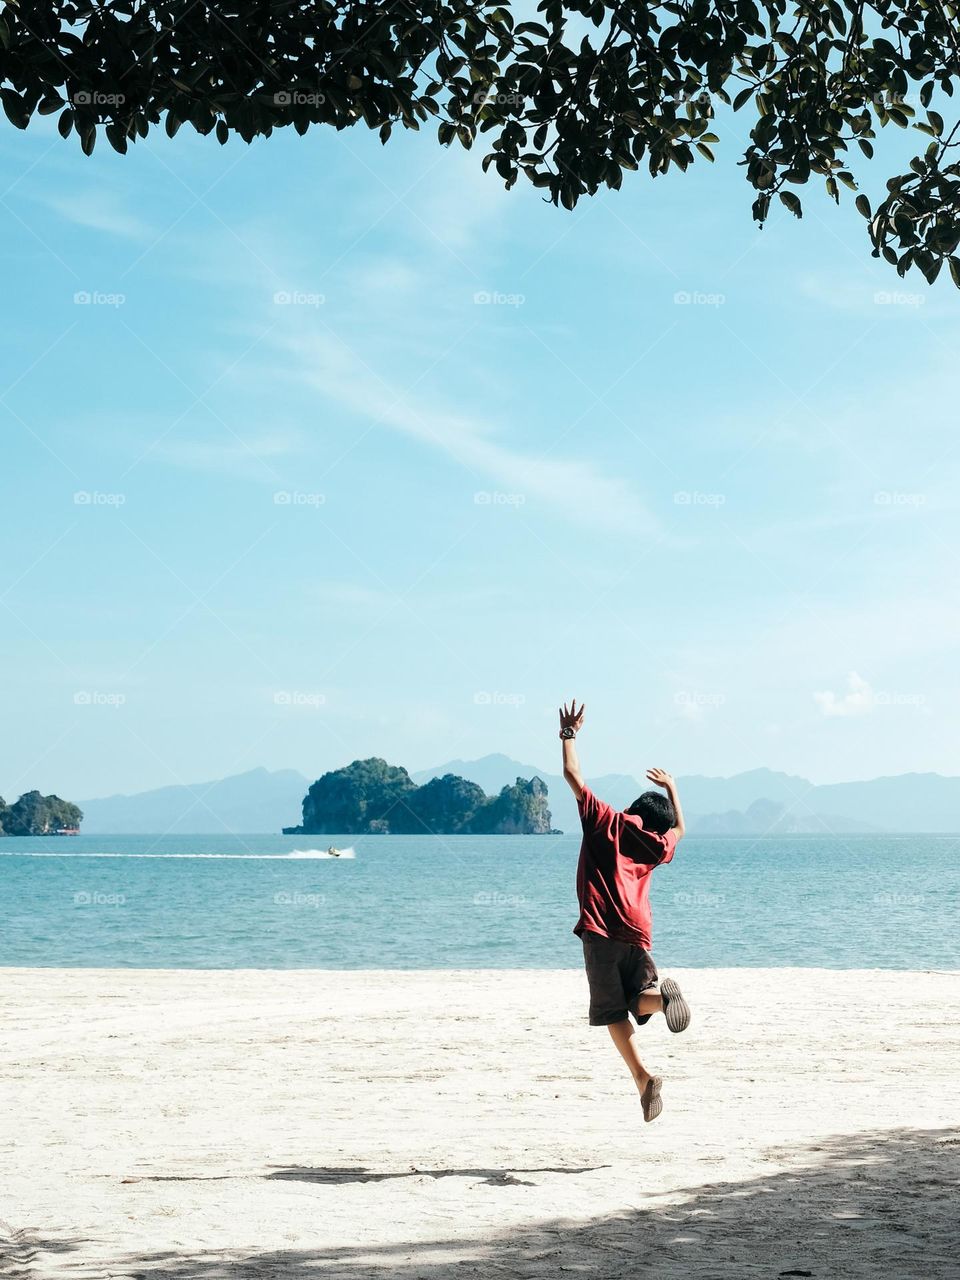 A young boy jumping with joy in the sunshine on the beach of Langkawi Tanjung Rhu, Malaysia